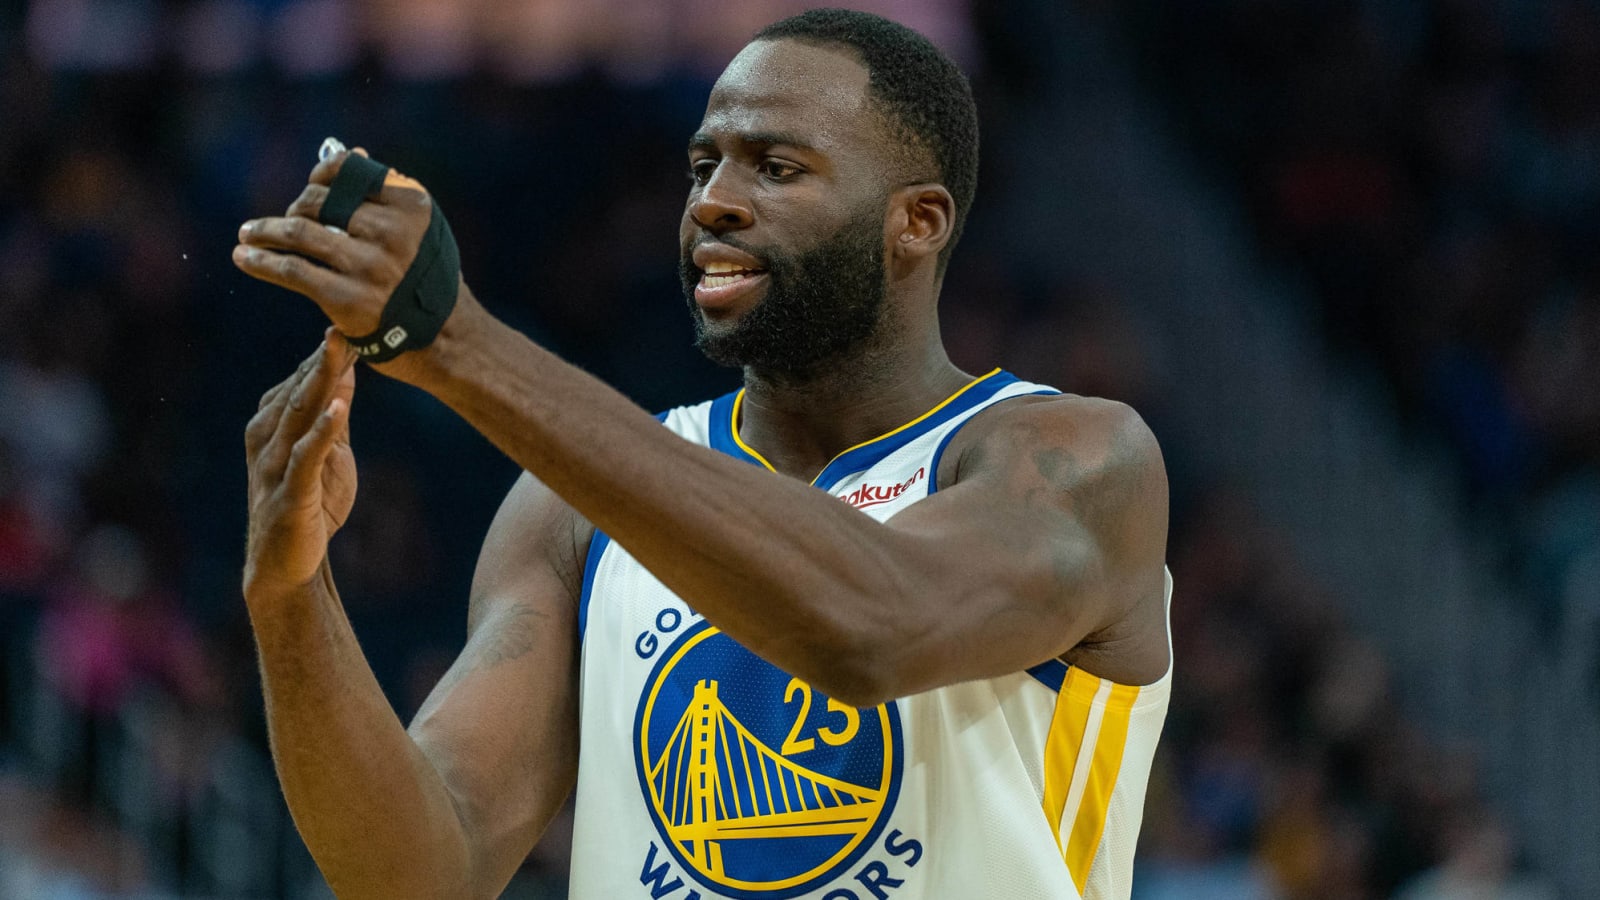 Draymond Green jokes about his cravings for Flamin’ Hot Cheetos